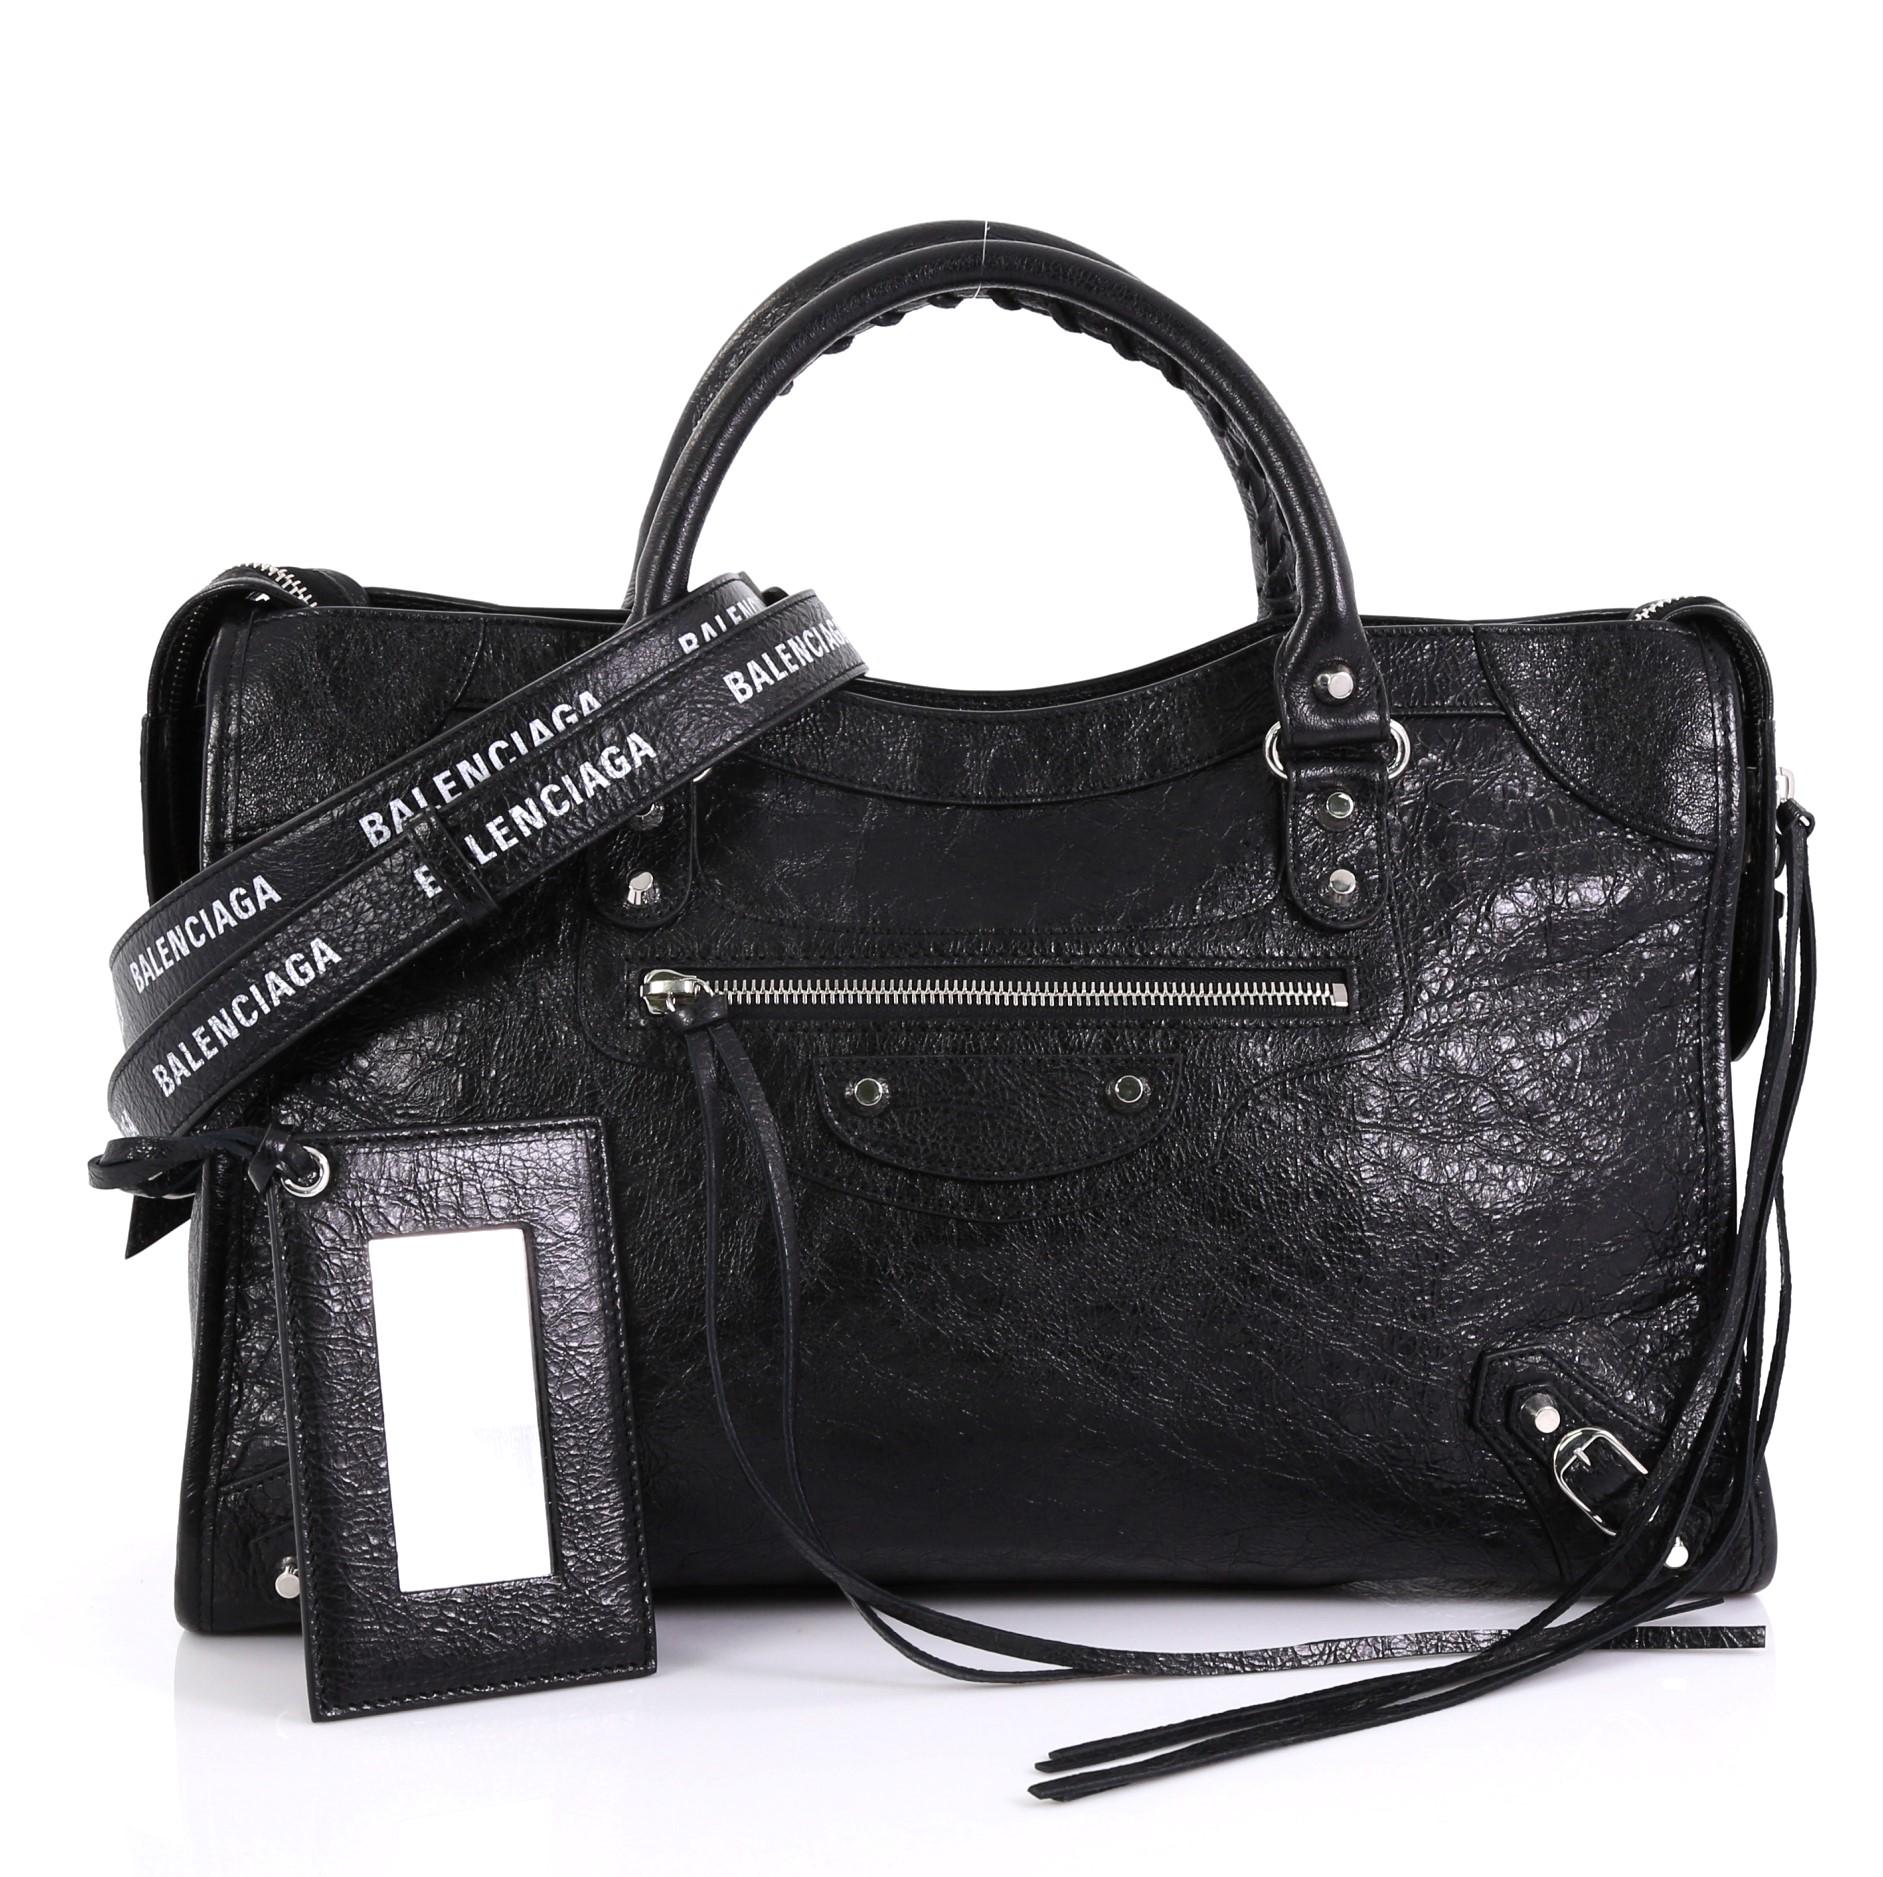 This Balenciaga City Classic Studs Bag Leather Medium, crafted from black leather, features dual braided woven handles, stud and buckle details, exterior front zip pocket, and silver-tone hardware. Its top zip closure opens to a black fabric